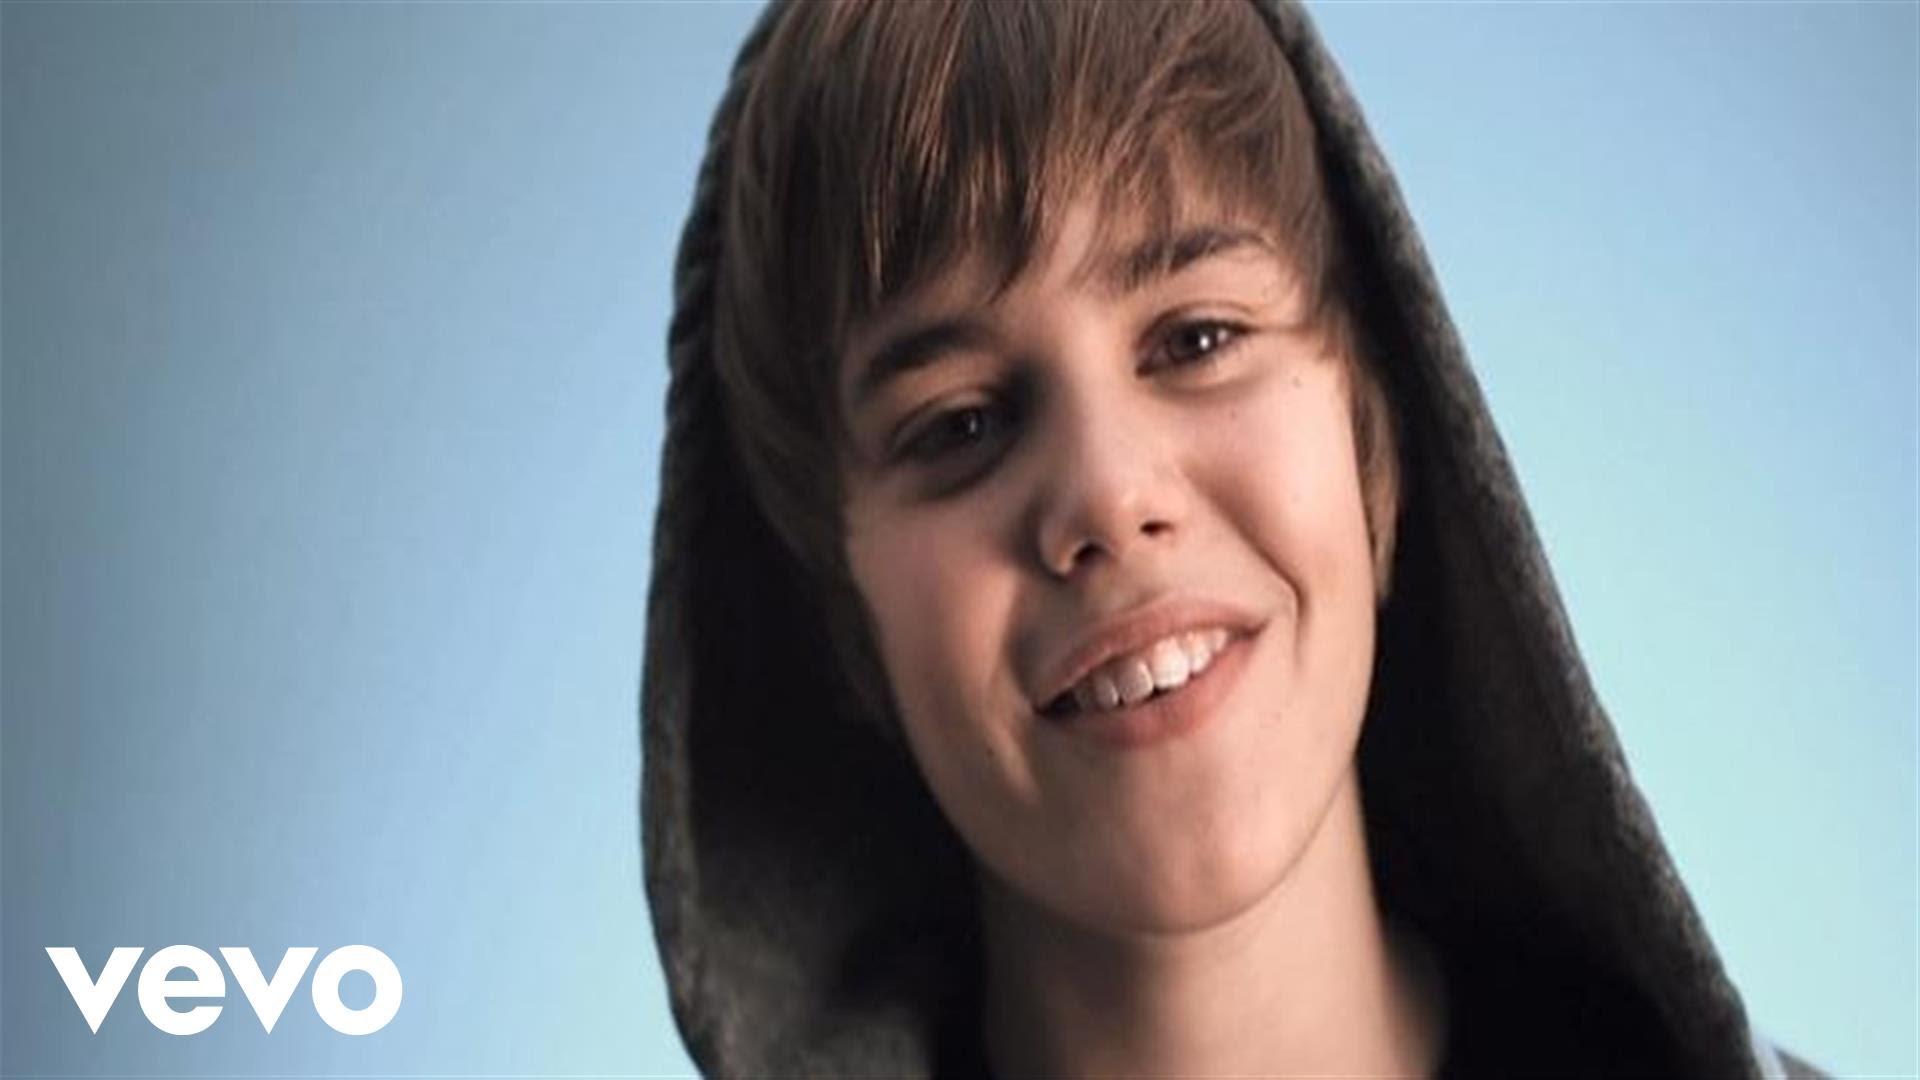 Justin Bieber - One time